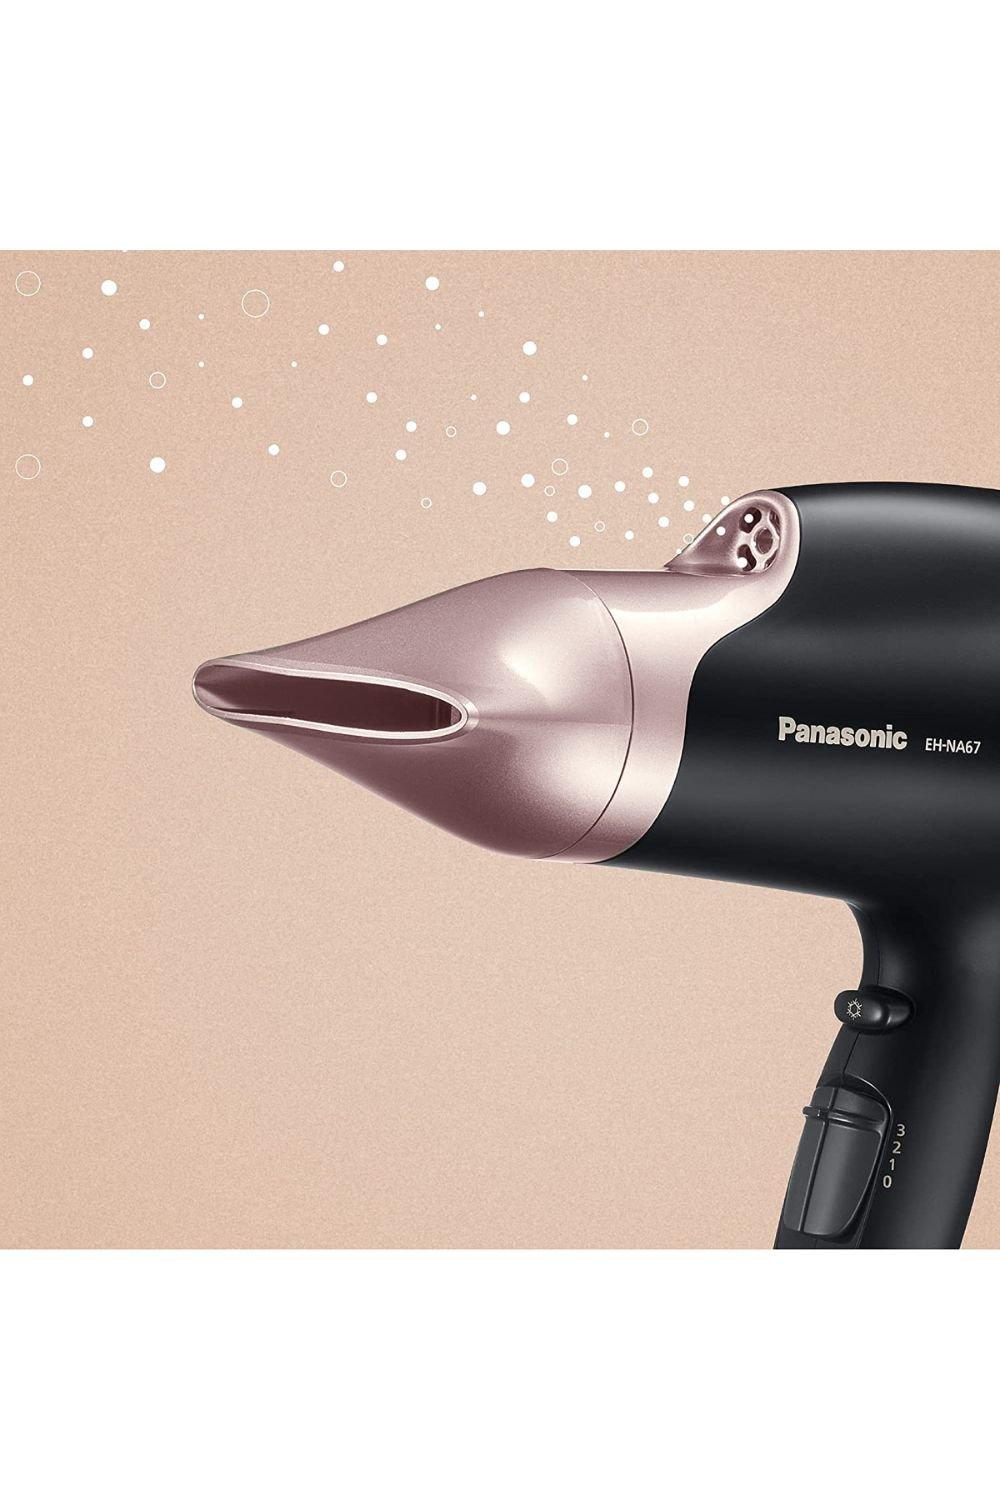 | EH-NA67 | Nozzle Hair Hair and (Pink Oscillating for with Styling Diffuser Gold) nanoe Panasonic Tools Protection Dryer Scalp